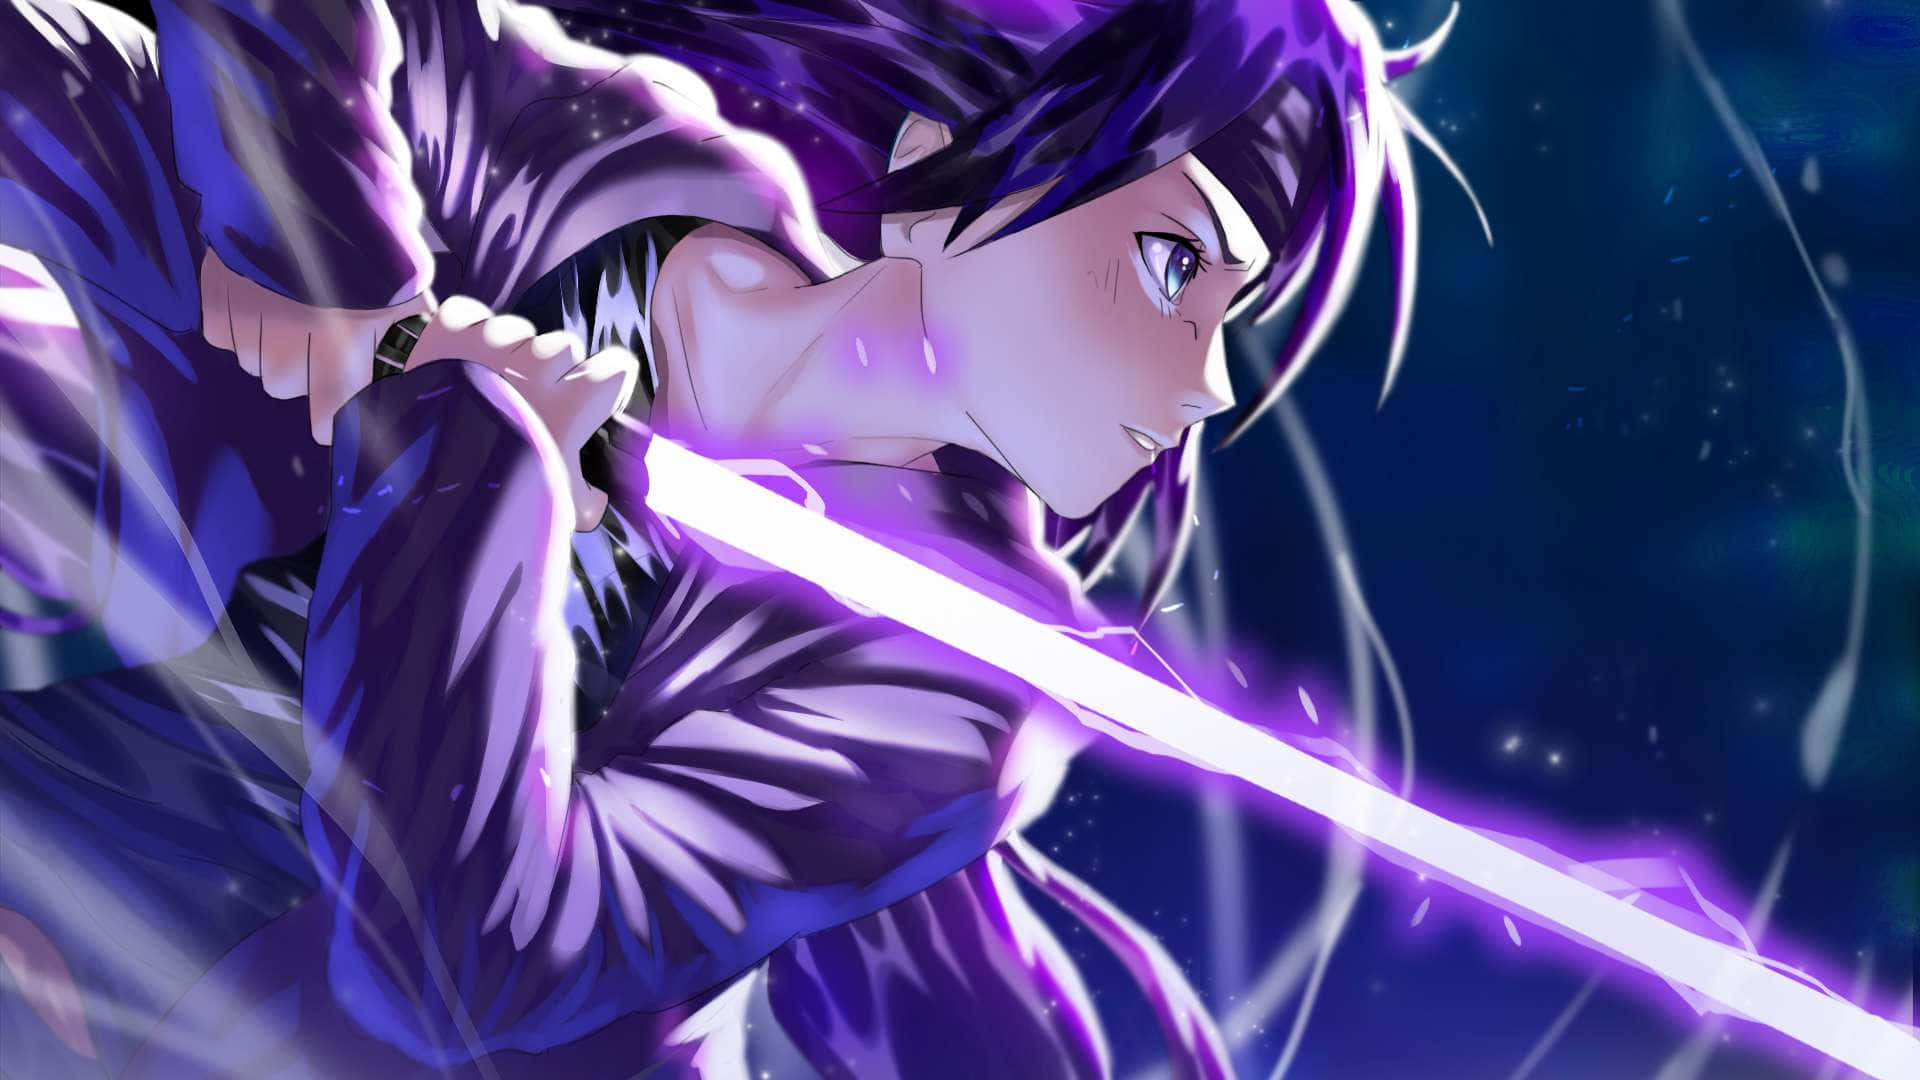 Magical Purple Anime Background, Perfect for Dreams and Adventure